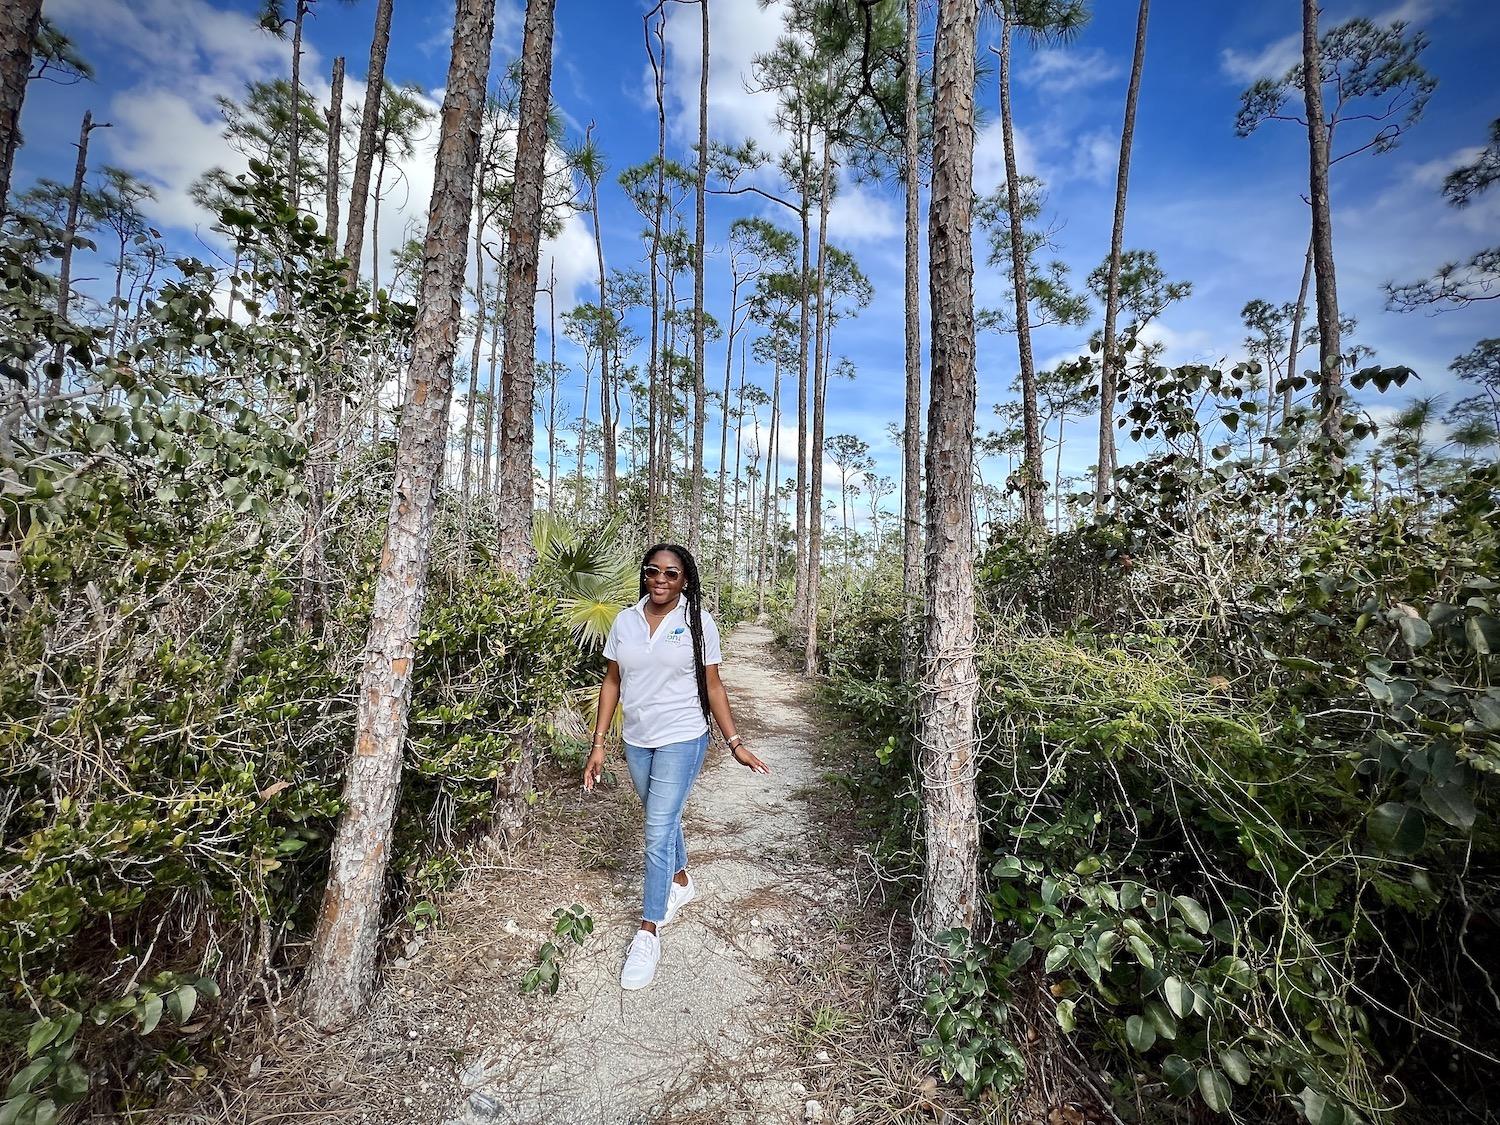 At the Rand Nature Centre, education officer Ann-Marie Carroll strolls in the Caribbean pine forest.